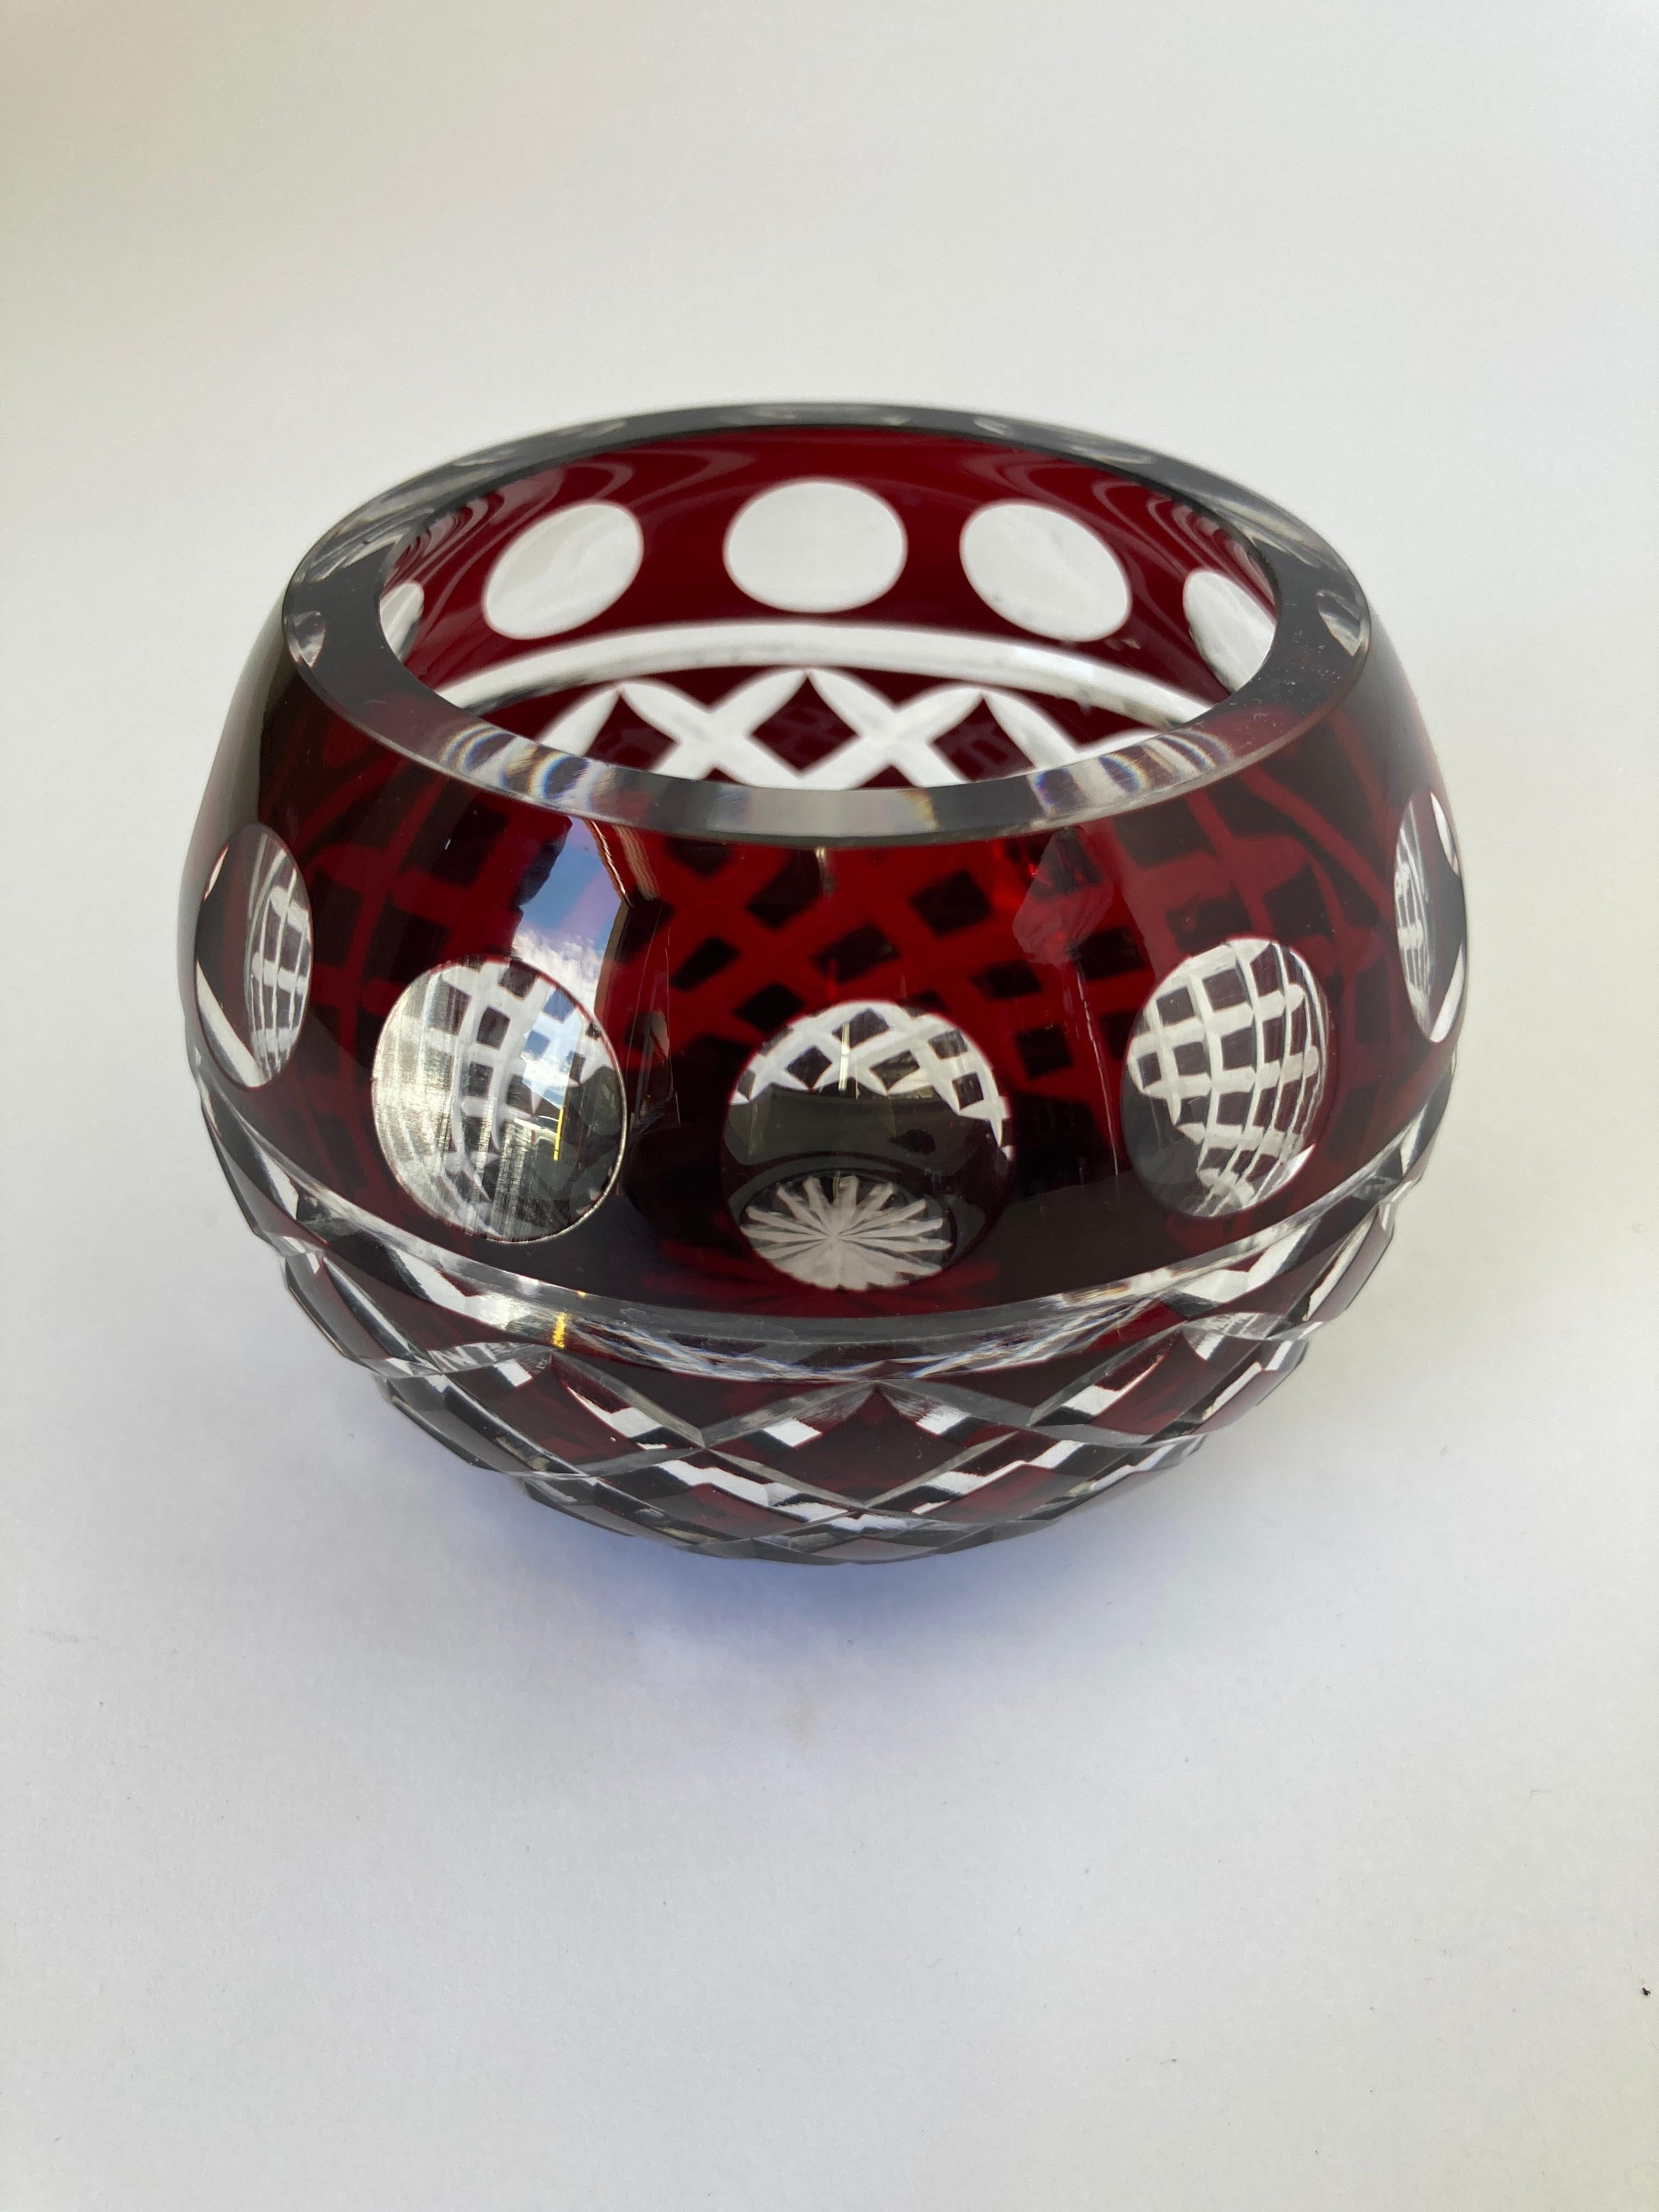 Bohemian cut crystal votive holder in cranberry color cut to clear.
Cut crystal from dark red wine color to clear
Crystal glass in excellent condition.
Great to use with votive candle or as a decorative glass bowl.
 